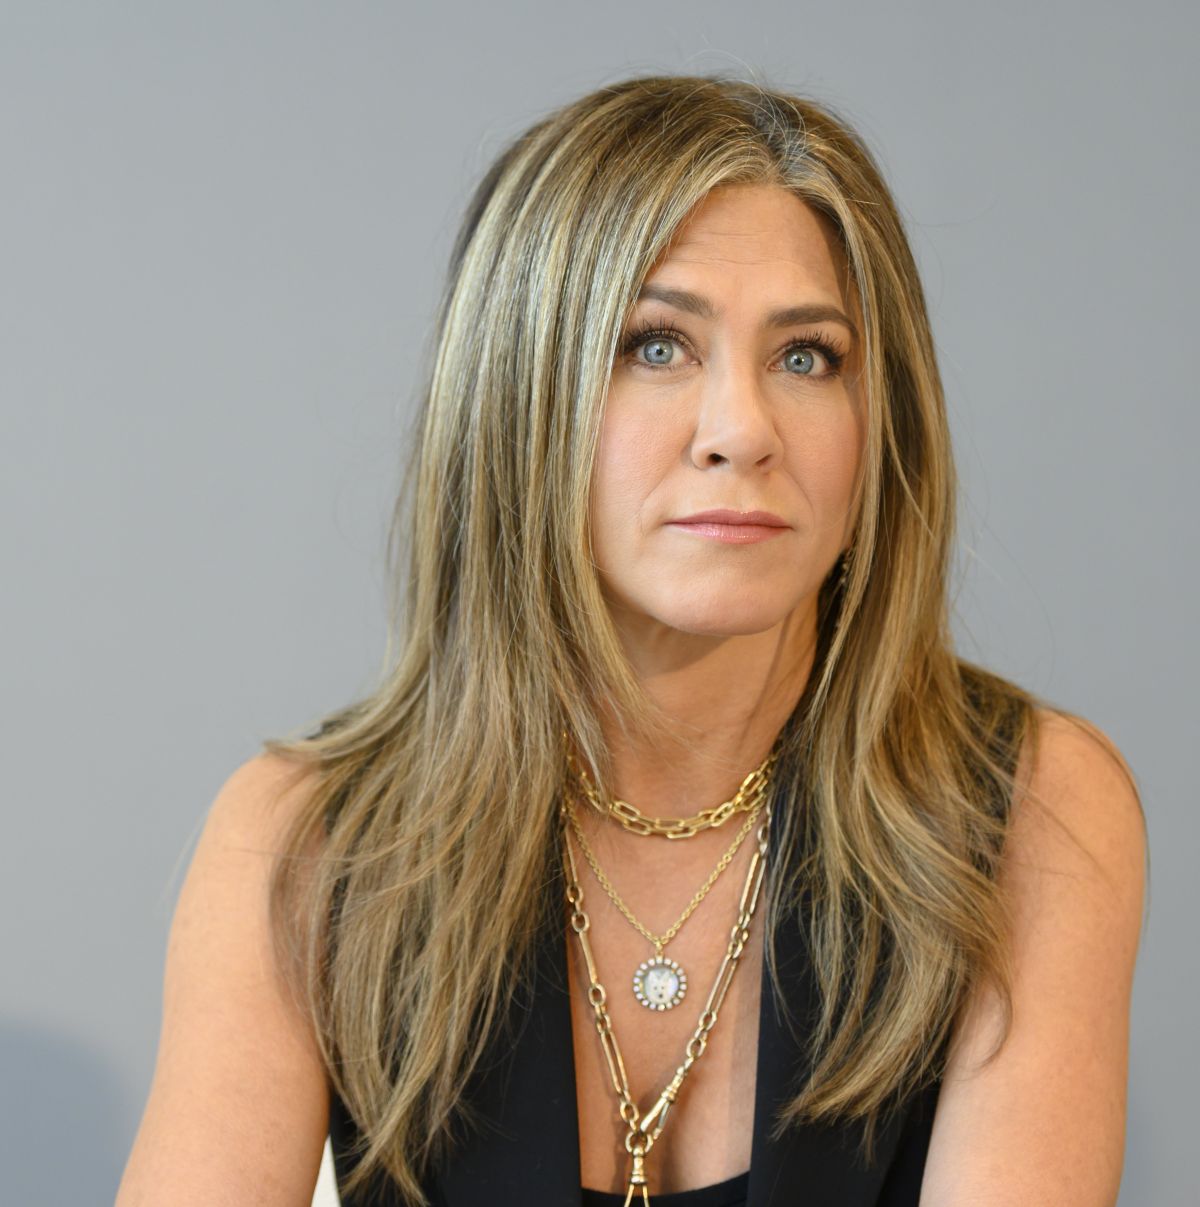 Collection 99+ Images recent photos of jennifer aniston Latest